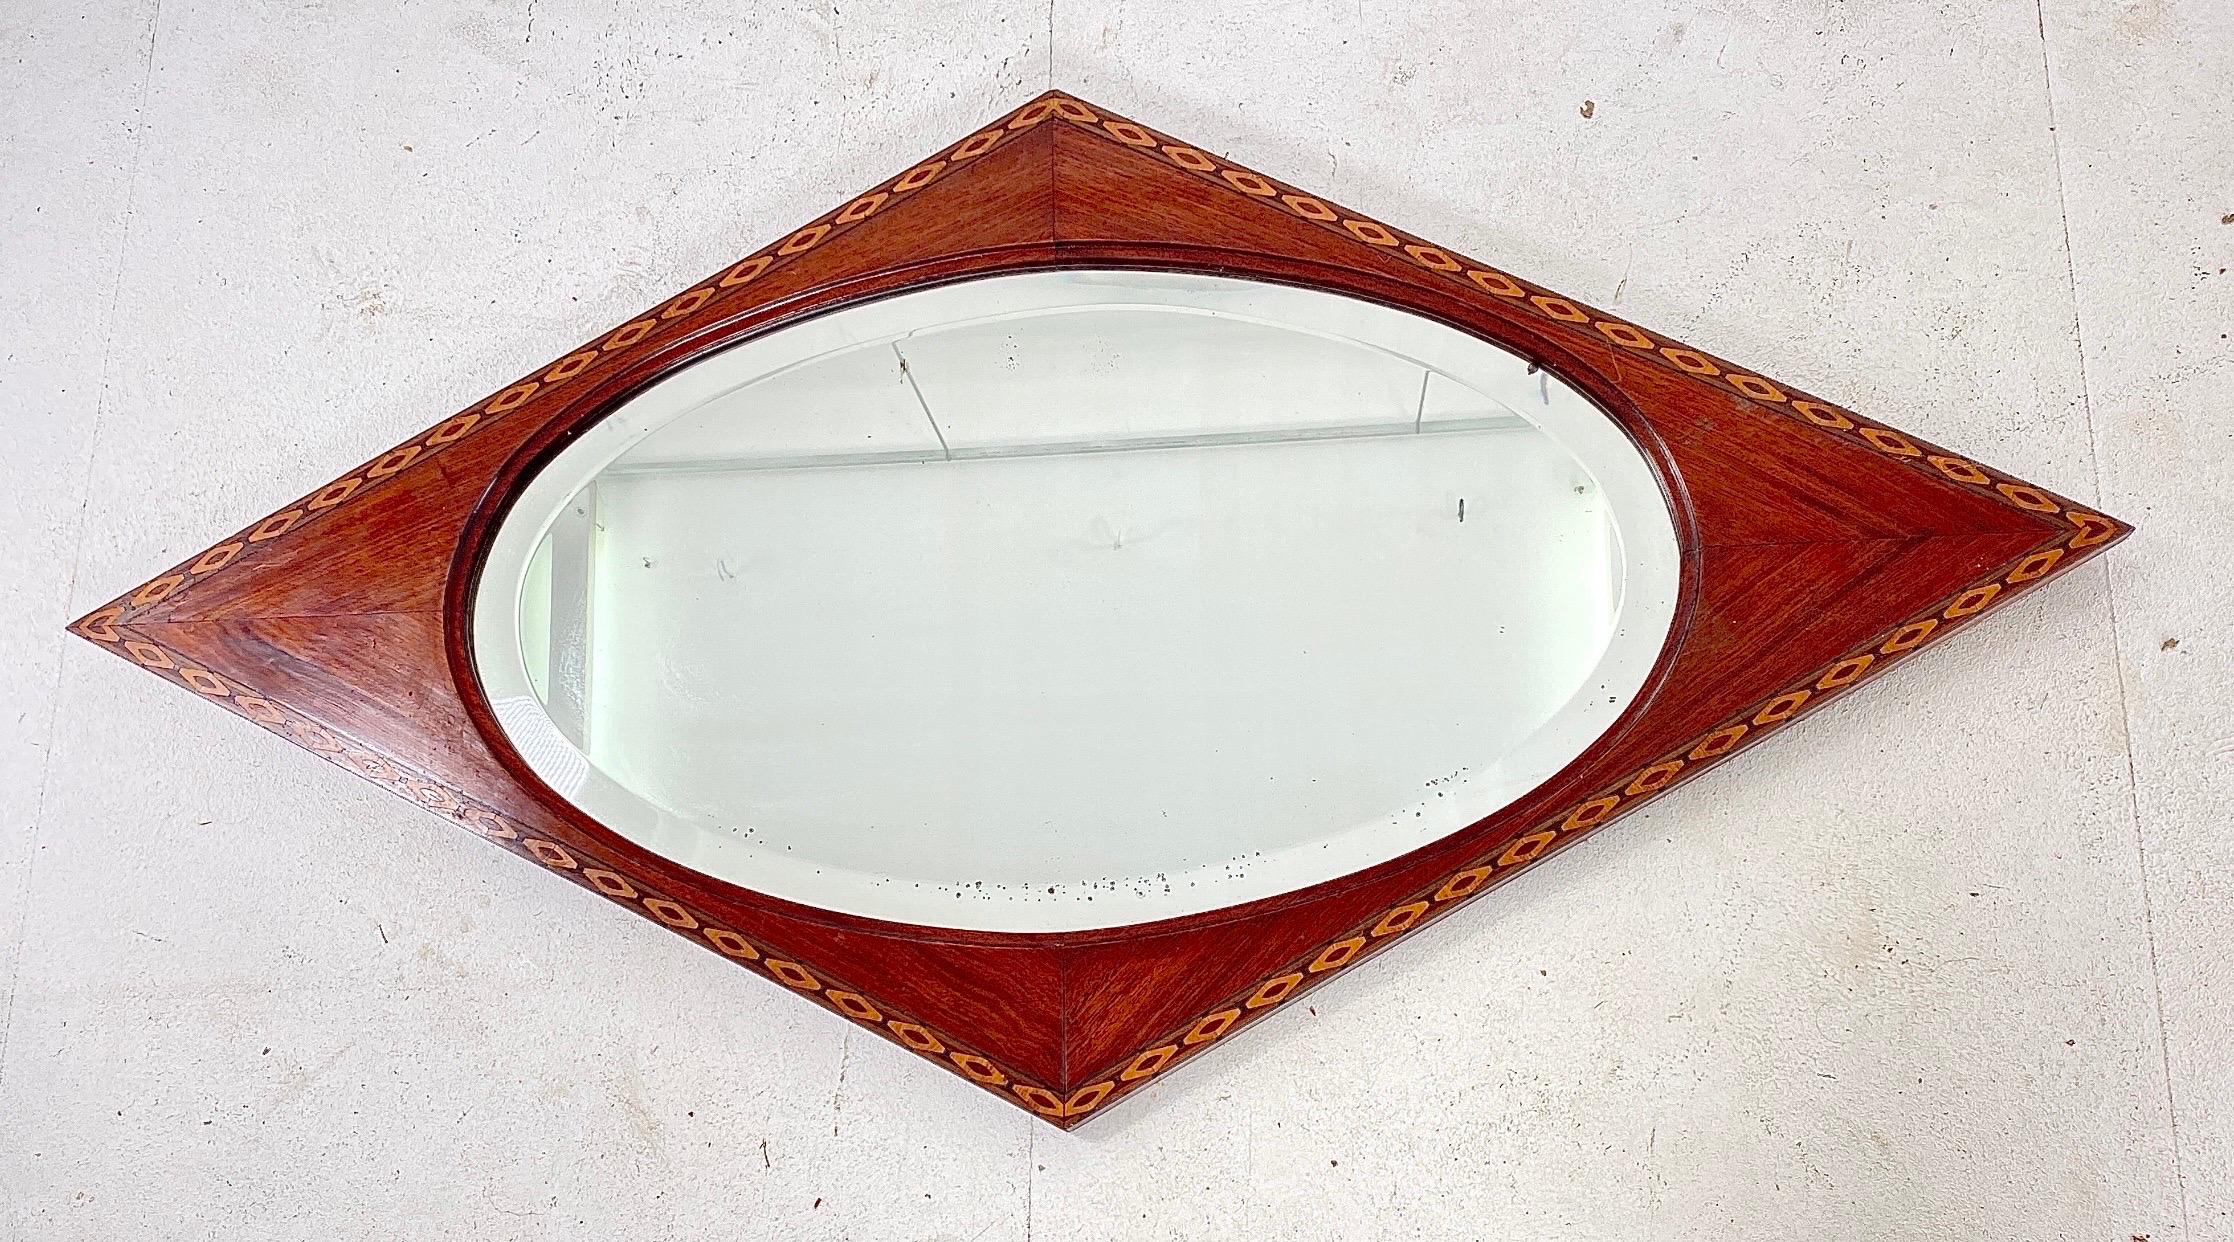 Wonderful and rare Art Deco mirror.
Striking French design from the thirties.
Mahogany veneered frame with original beveled glass mirror.
Original marquetry inlay.
In good original condition with minor wear consistent with age and